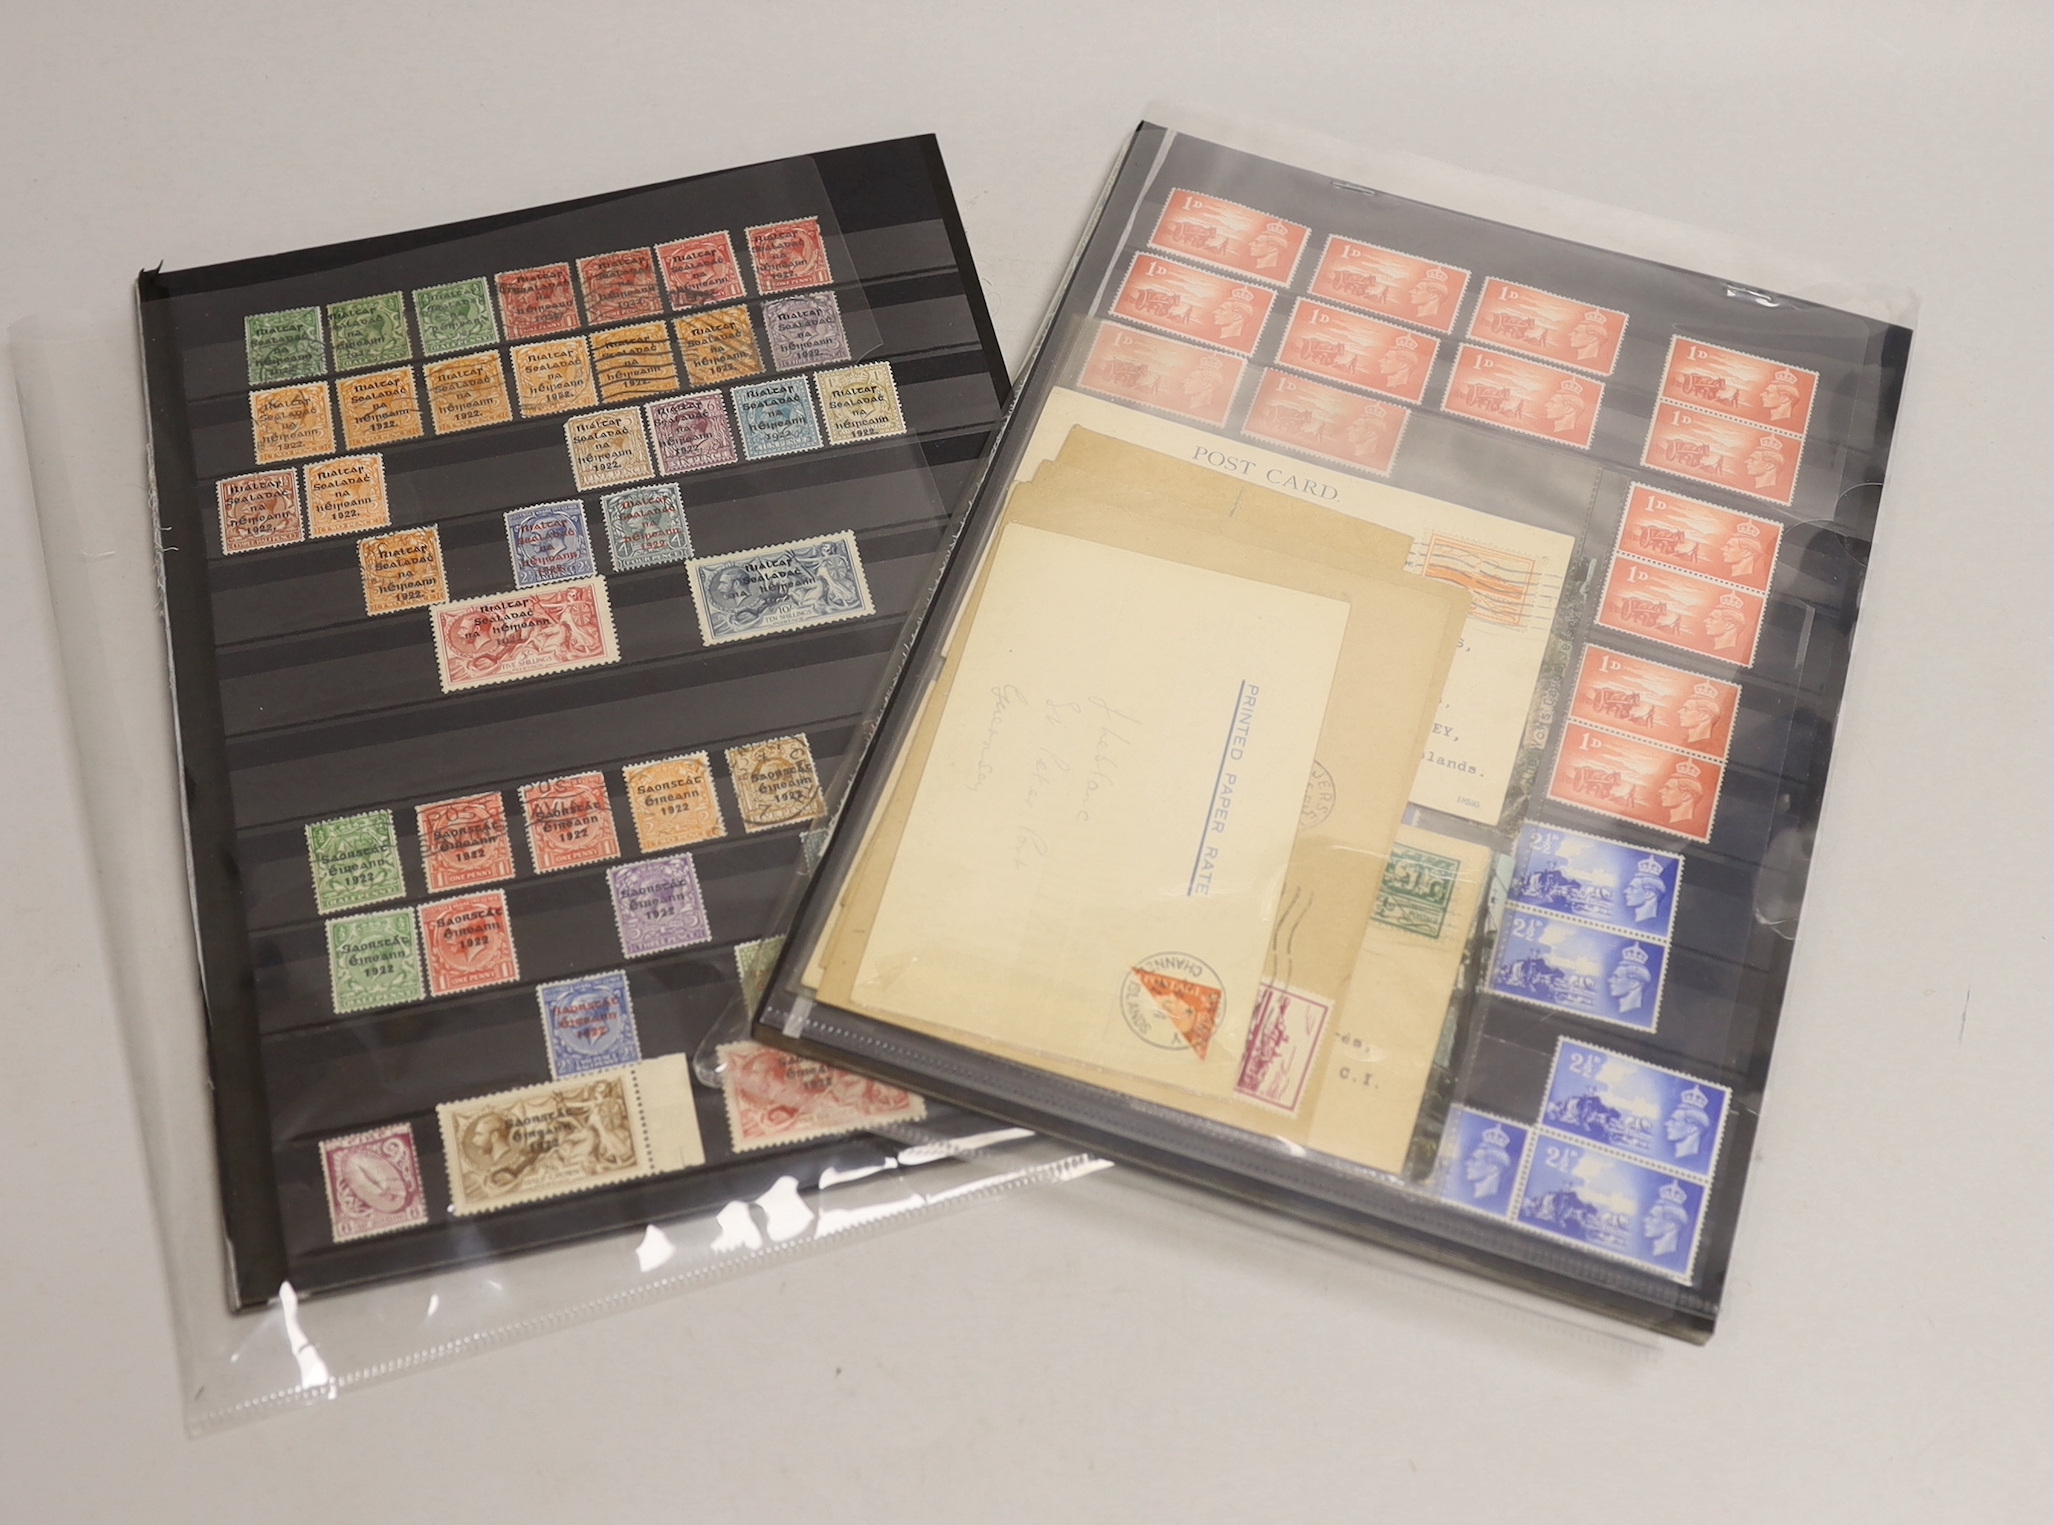 Post 1922 Irish stamps and 1940s Channel Islands stamps